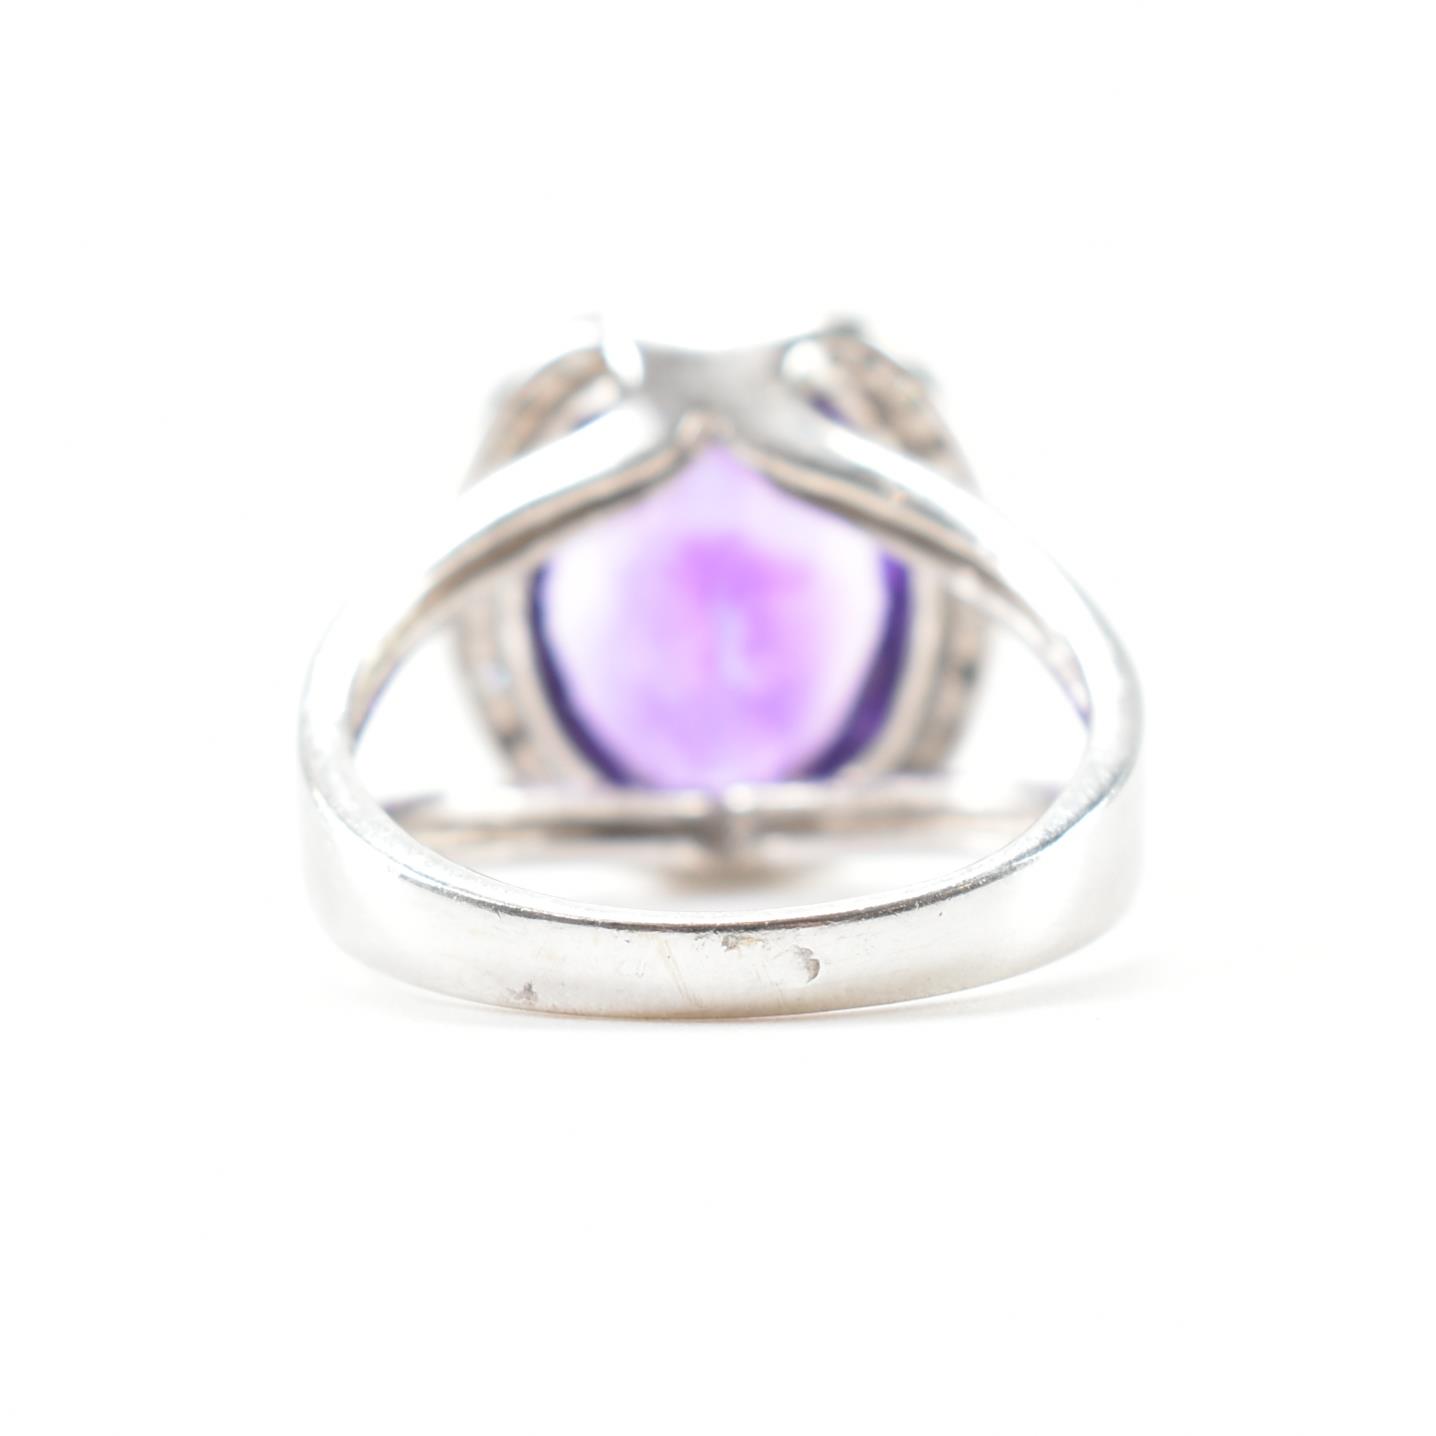 WITHDRAWN - FRENCH 18CT WHITE GOLD AMETHYST & DIAMOND COCKTAIL RING - Image 3 of 8